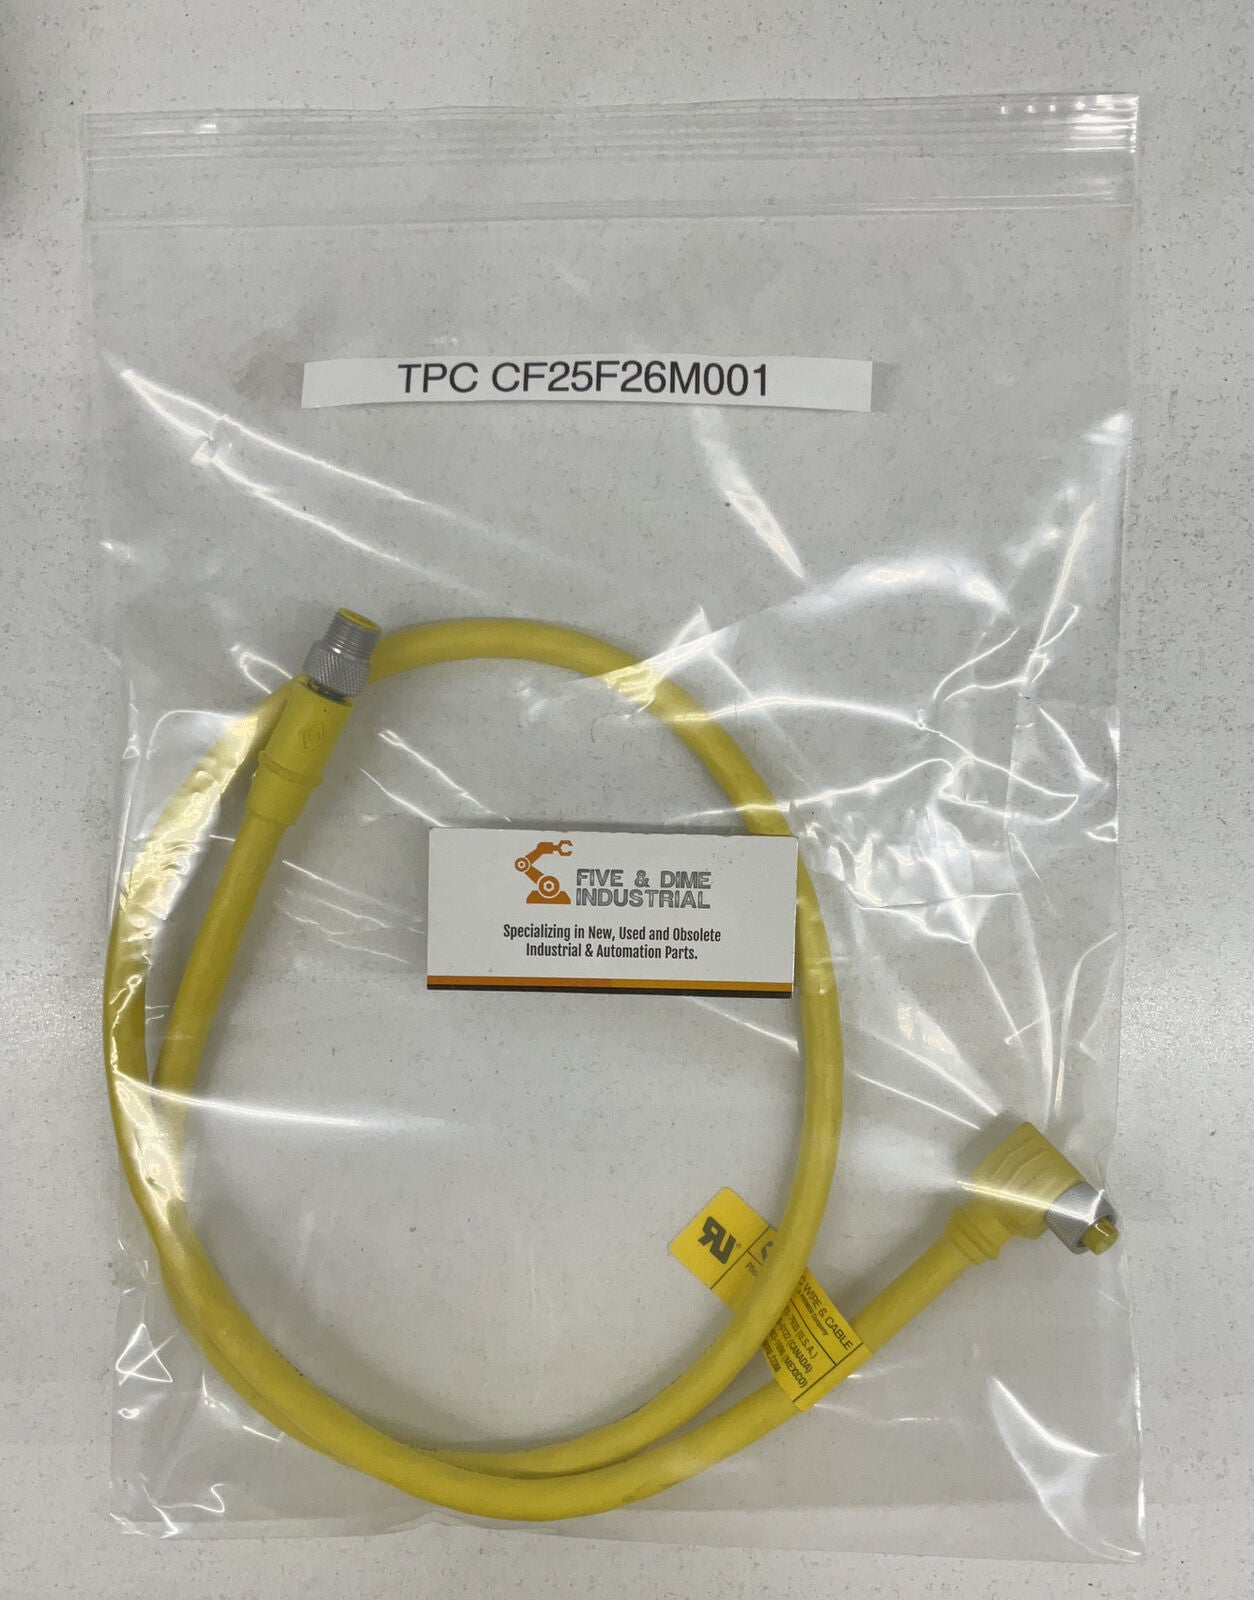 TPC CF25F26M001 MICRO QUICK CONNECT CABLE 1M  (CL324)